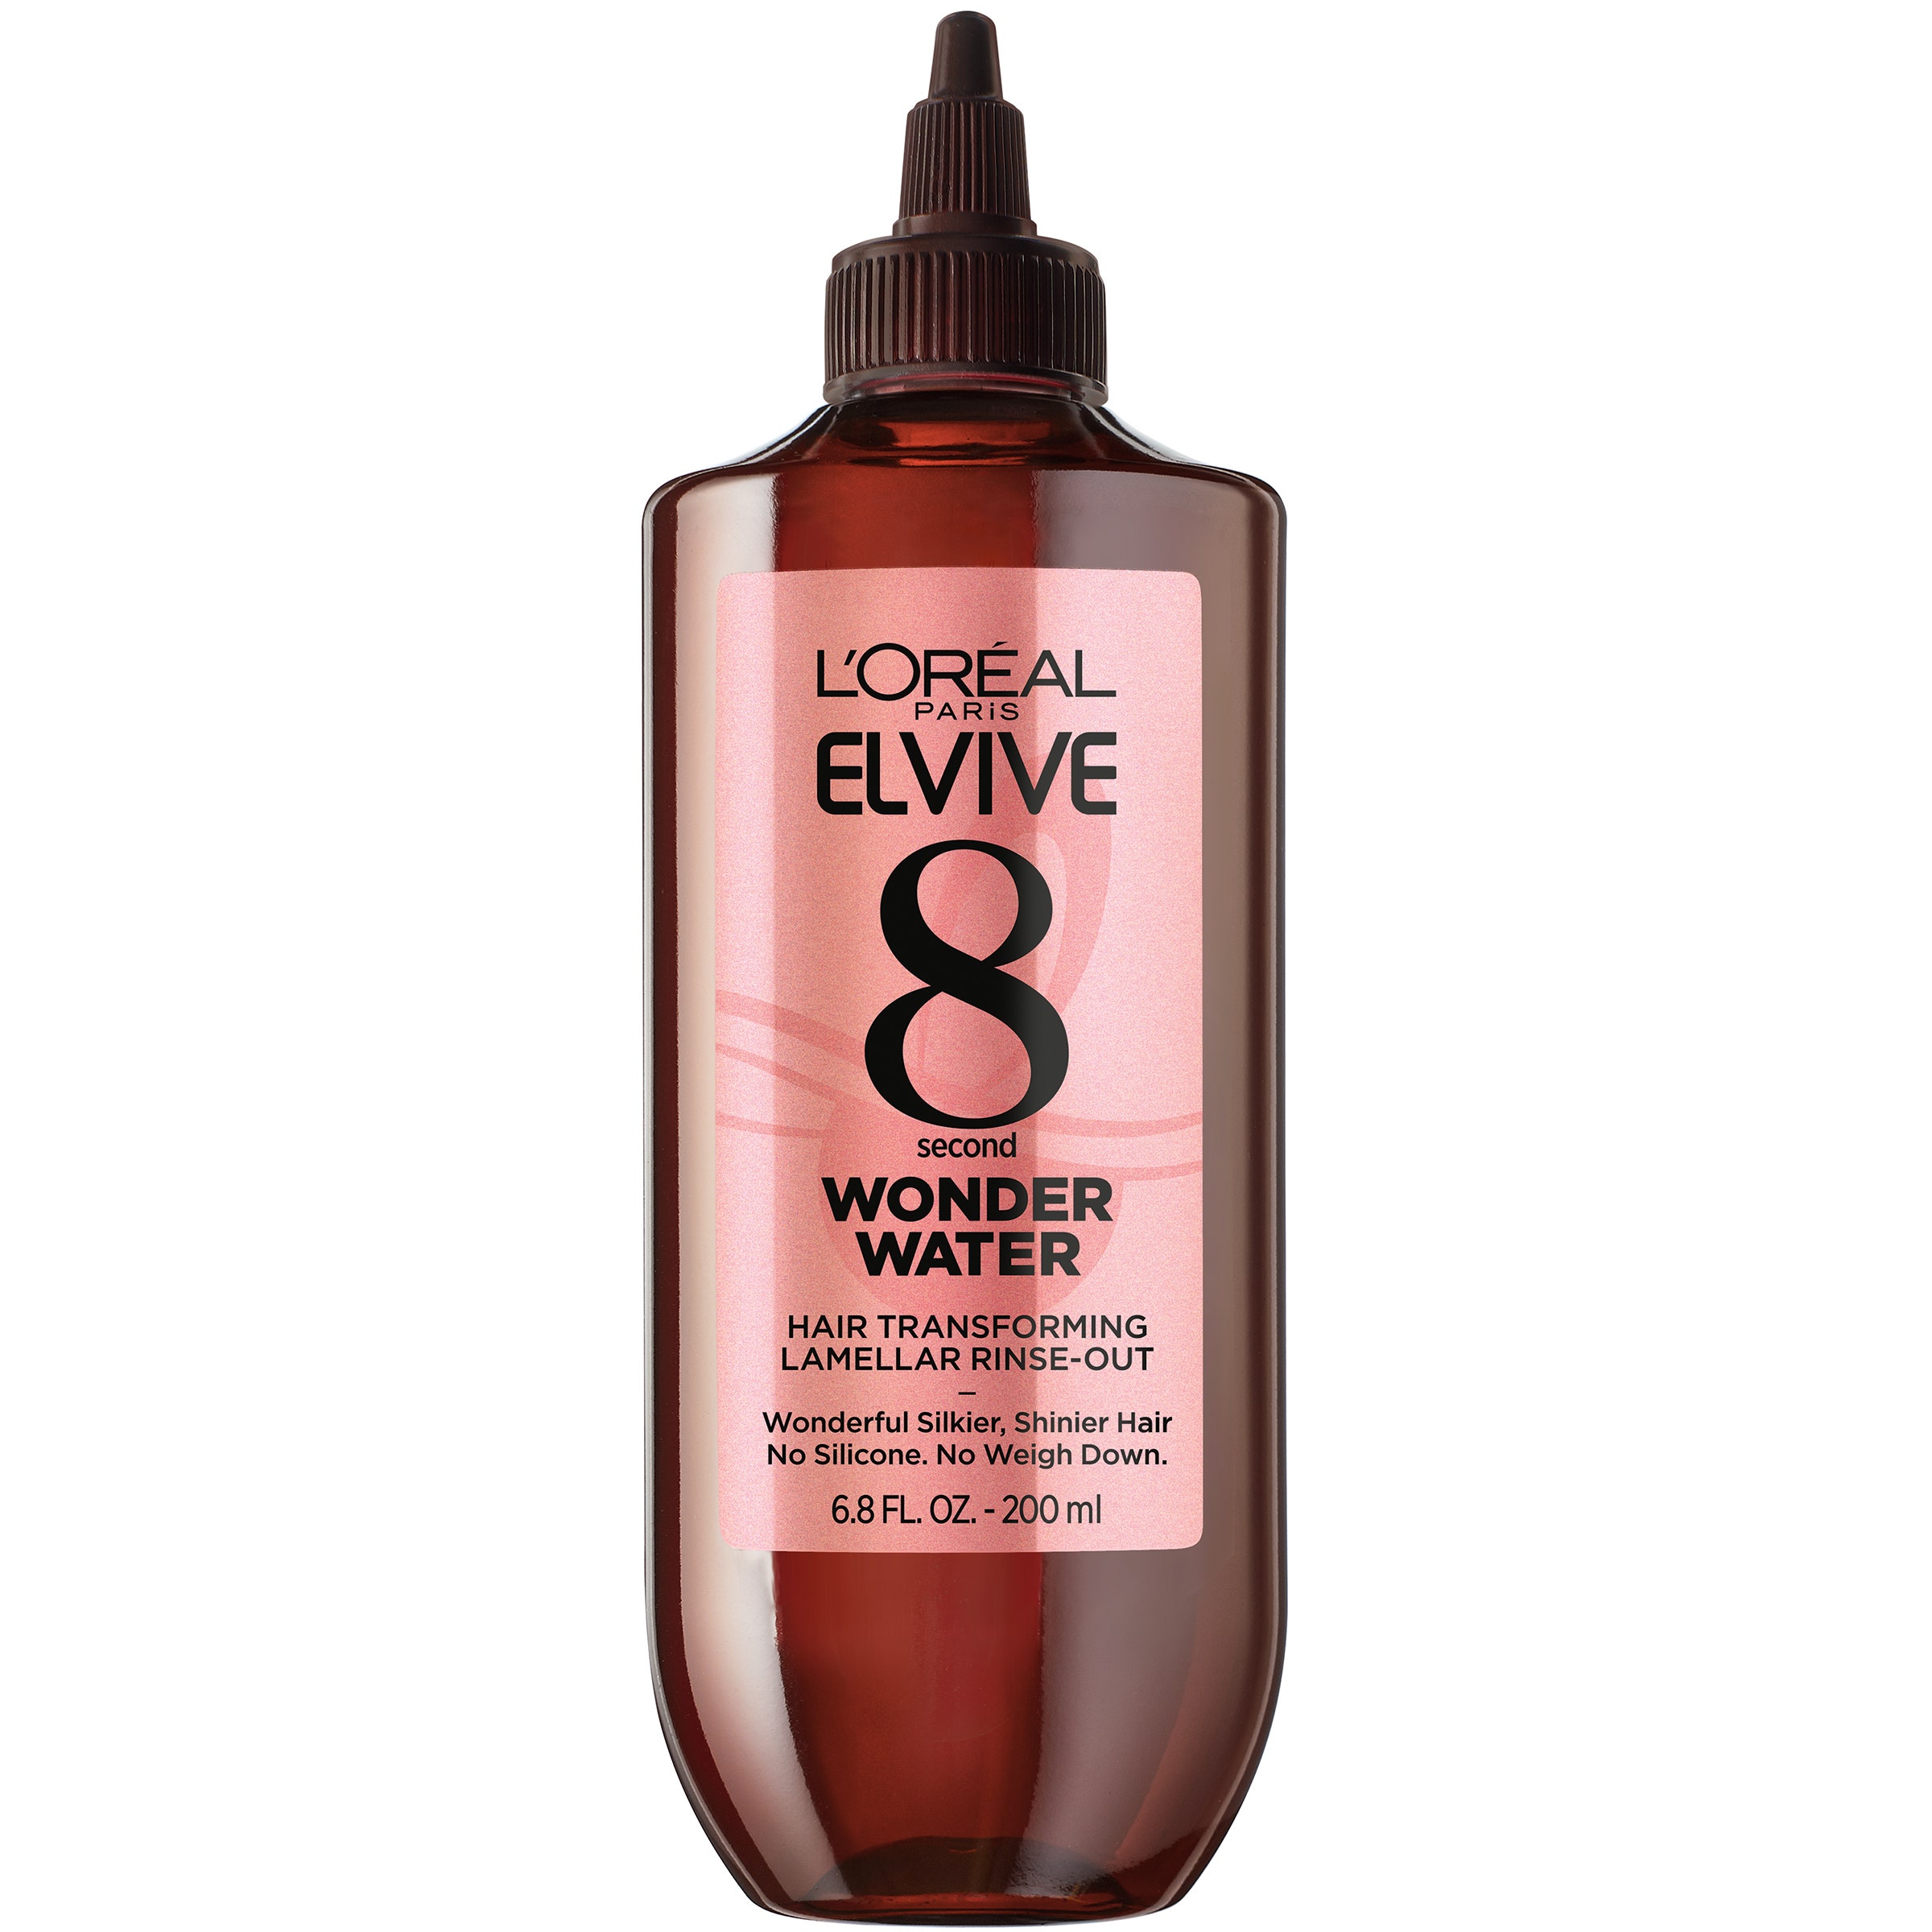 L'Oréal Paris Elvive 8 Second Wonder Water Is the Key to My At-Home Blowouts — Review